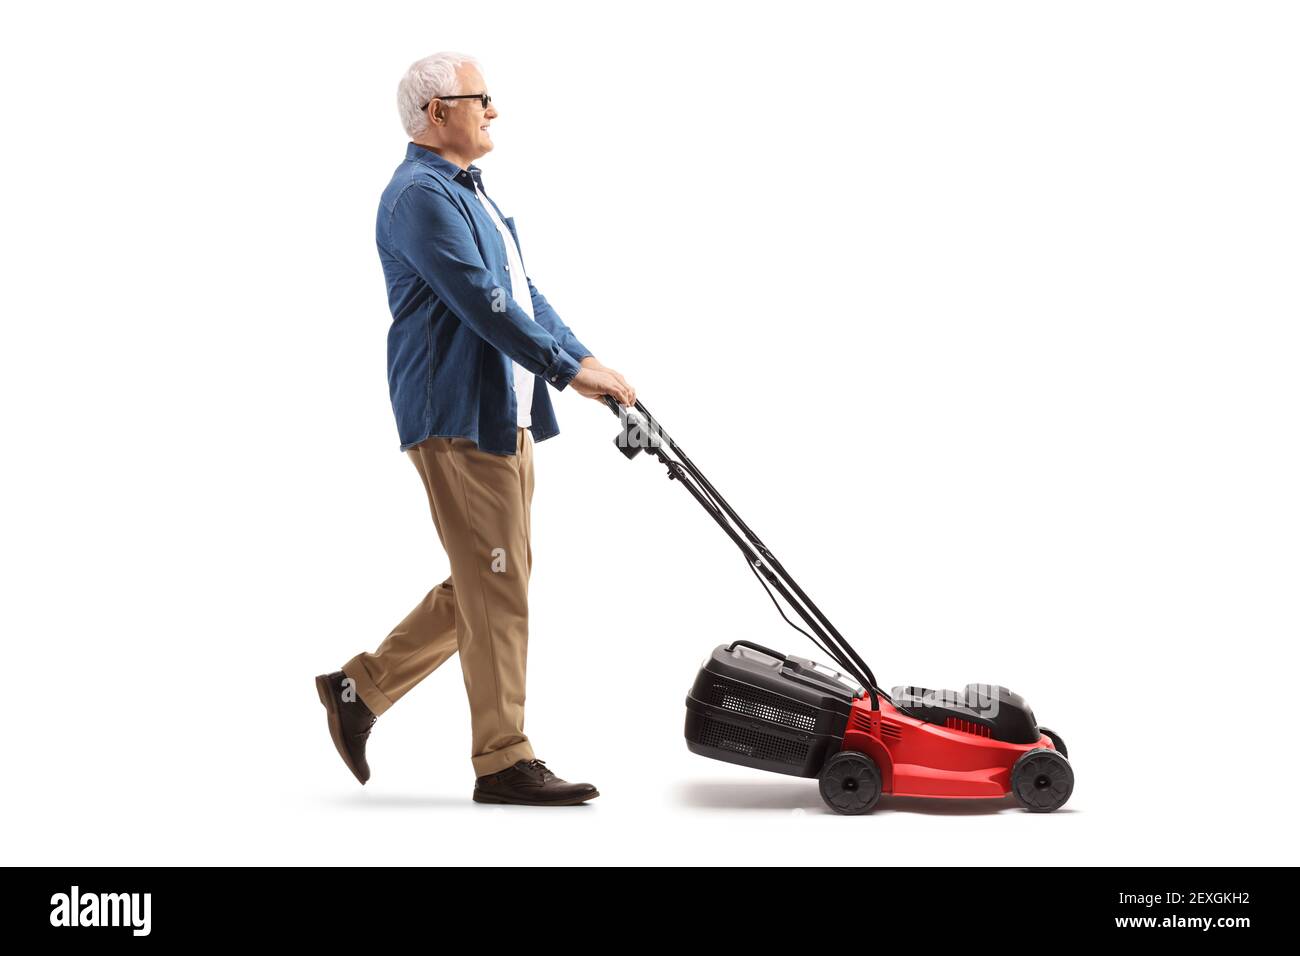 Full length profile shot of a mature man mawing with a lawnmower machine isolated on white background Stock Photo